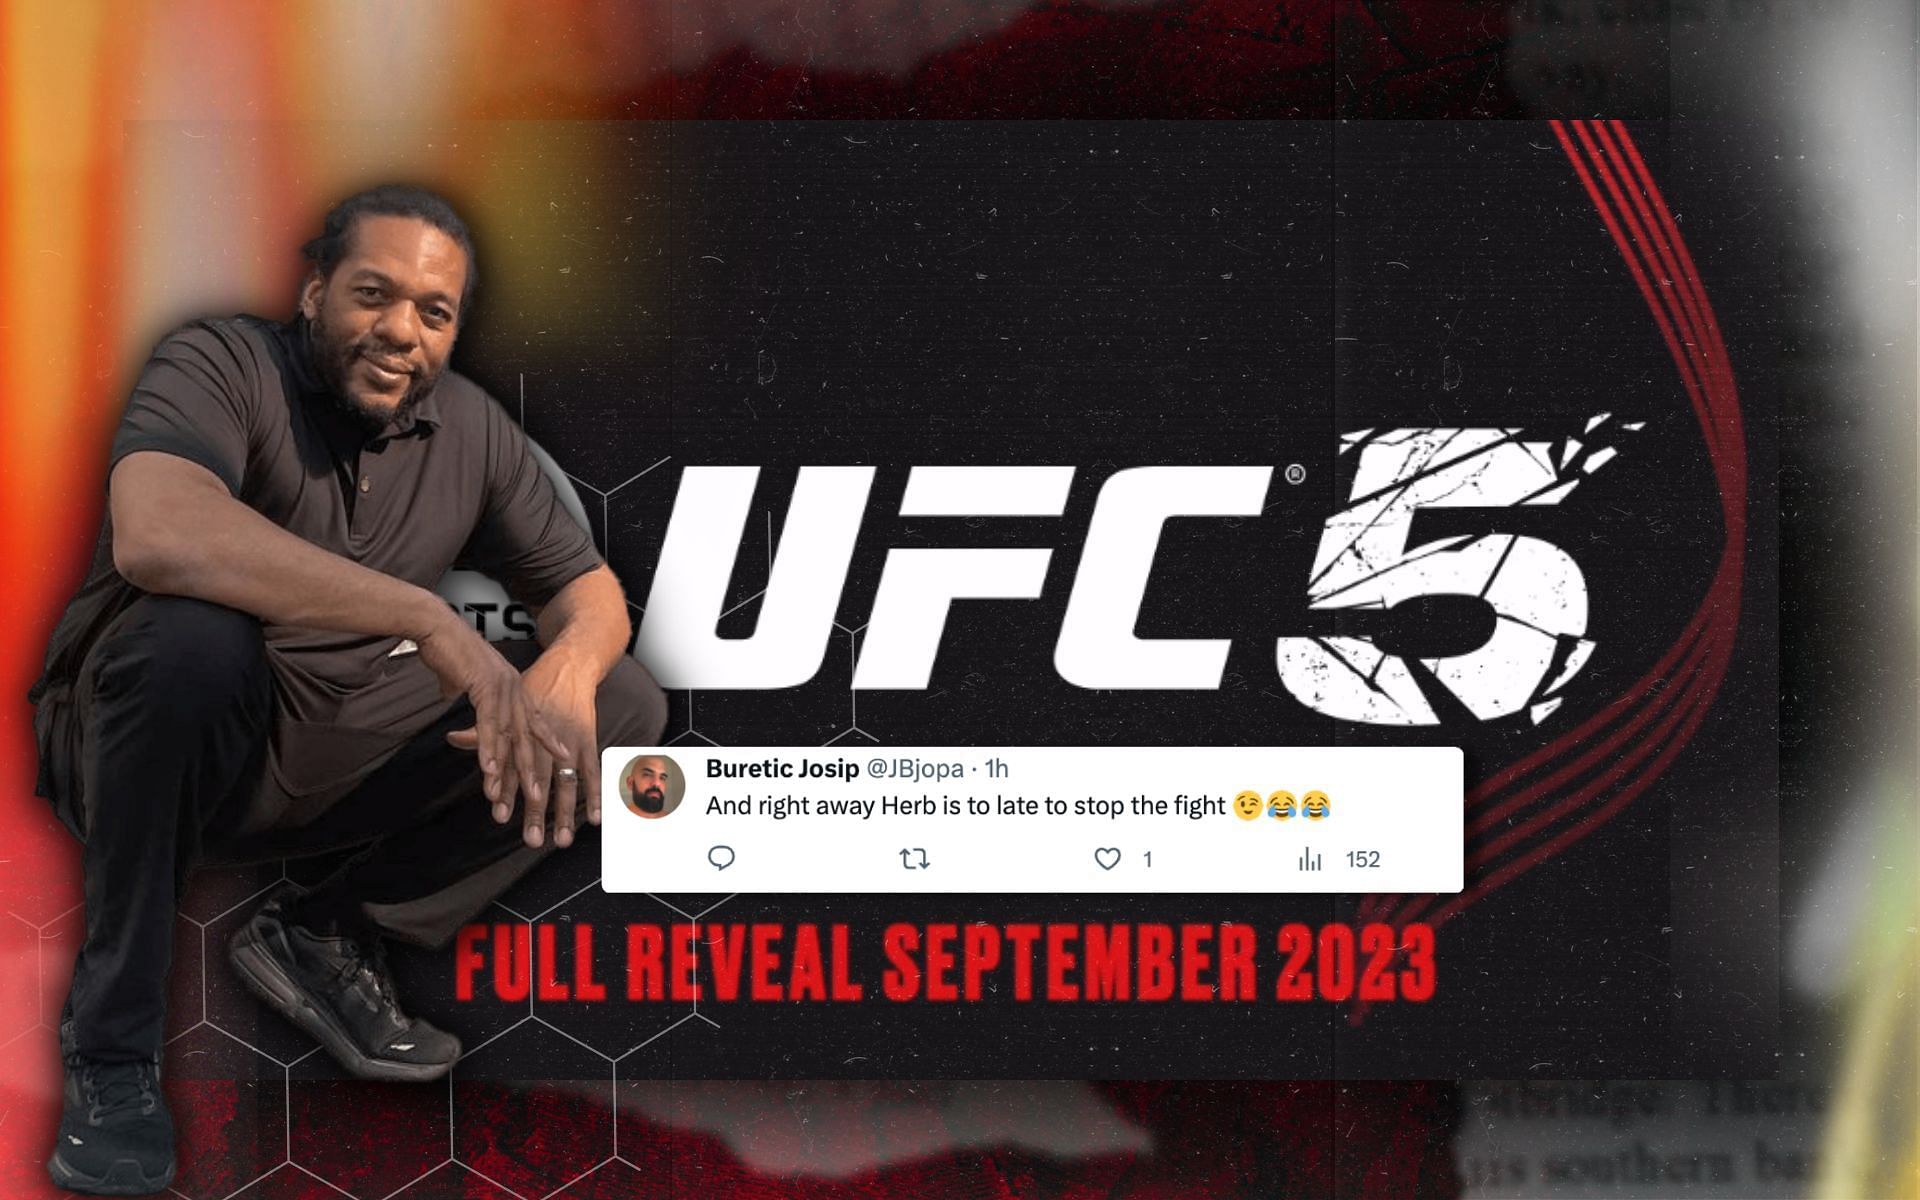 Fans react to recent UFC 5 gameplay screenshot leak. [Image credits: @herbdeanmma &amp; @easportsufc on Instagram]